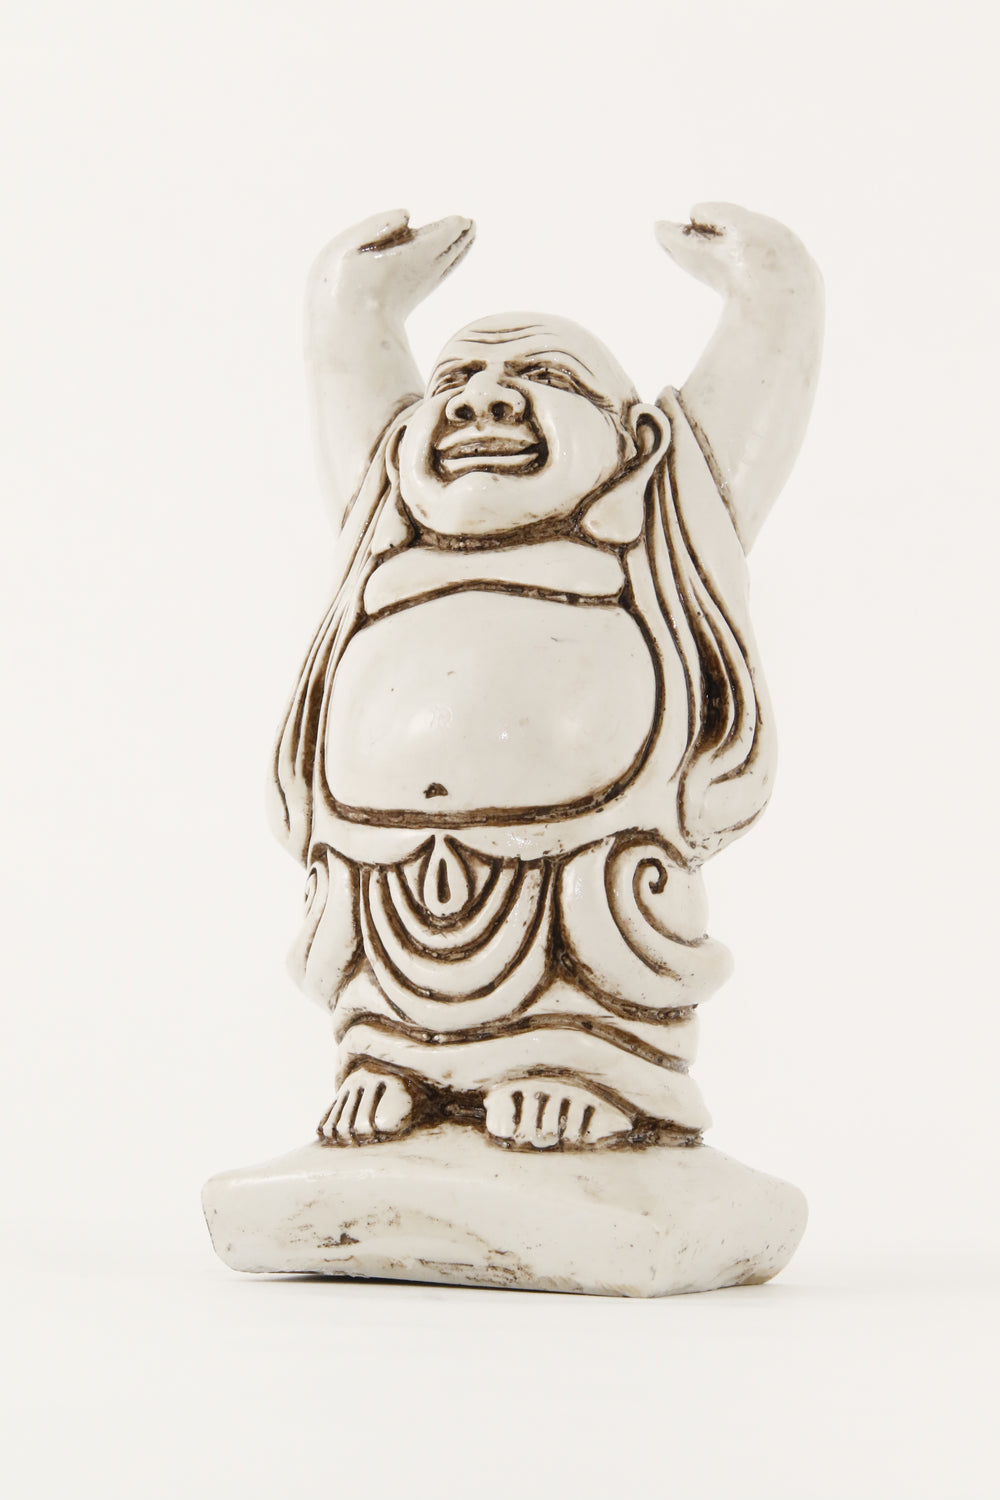 LAUGHING BUDDHA STATUE OFF-WHITE LARGE SIZE SIDE VIEW